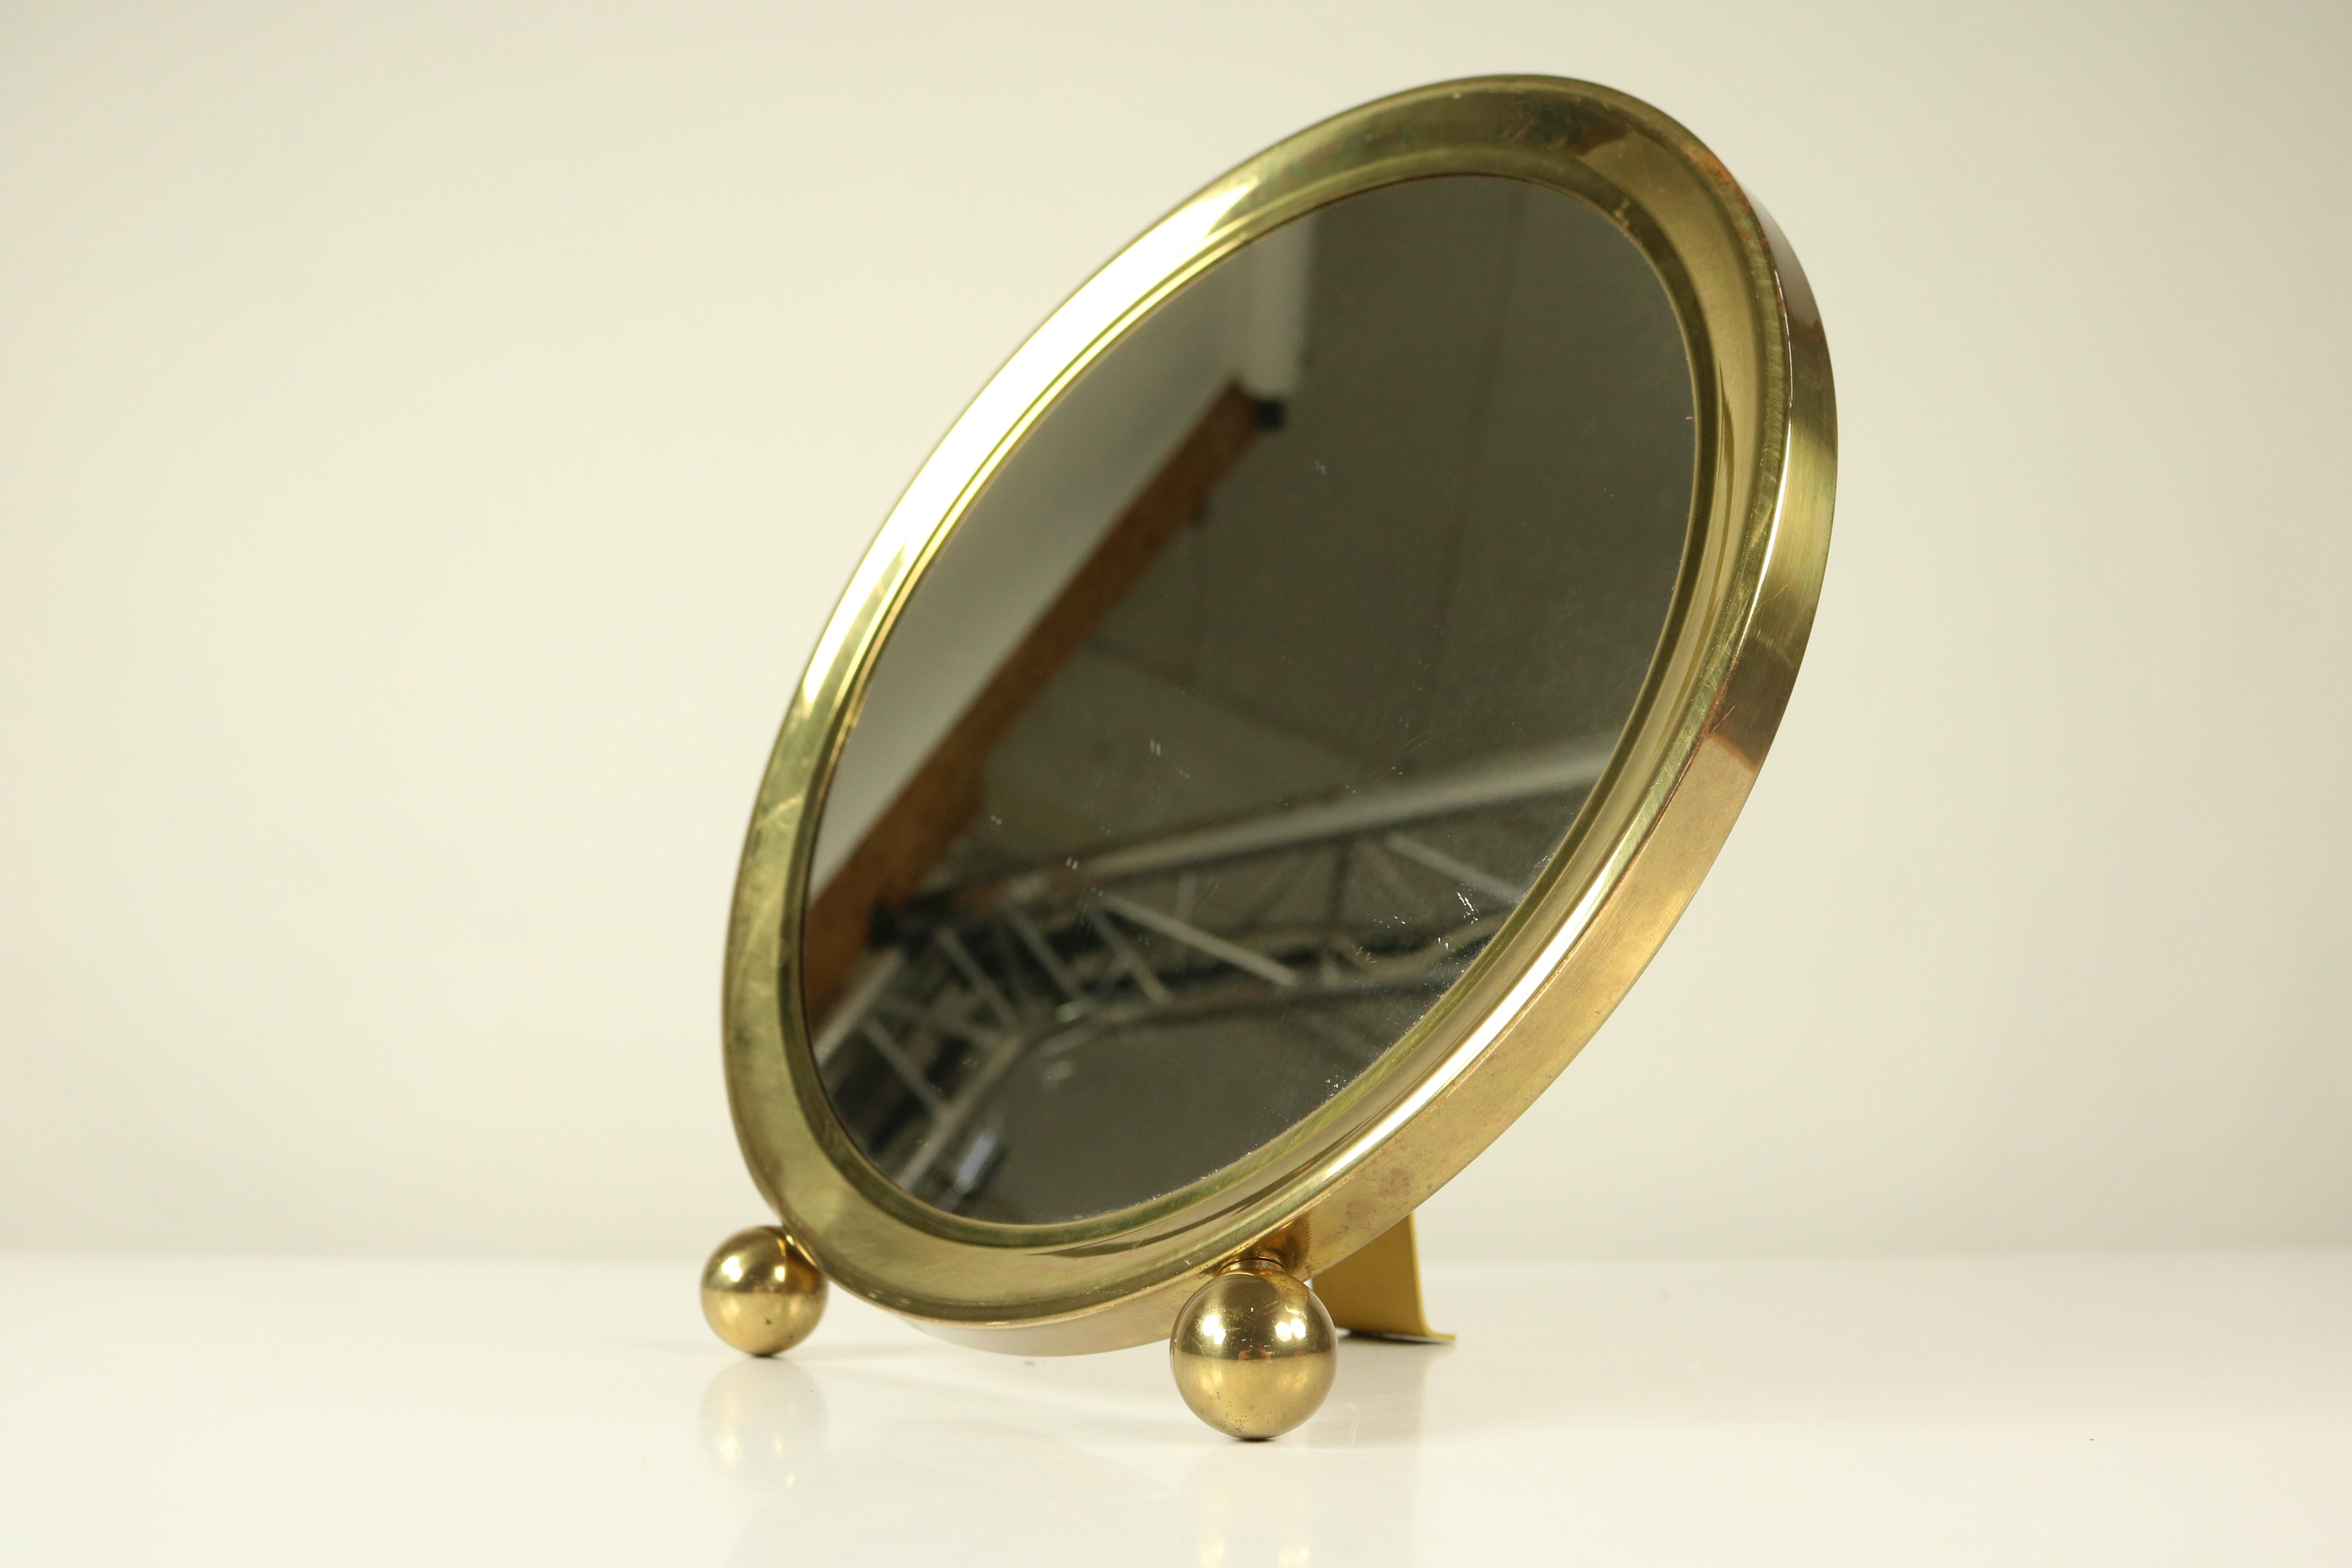 Mid-20th Century Art Deco Table Stand or Wall Mirror Brass Ball Feet VTG, 1940s-1950s For Sale